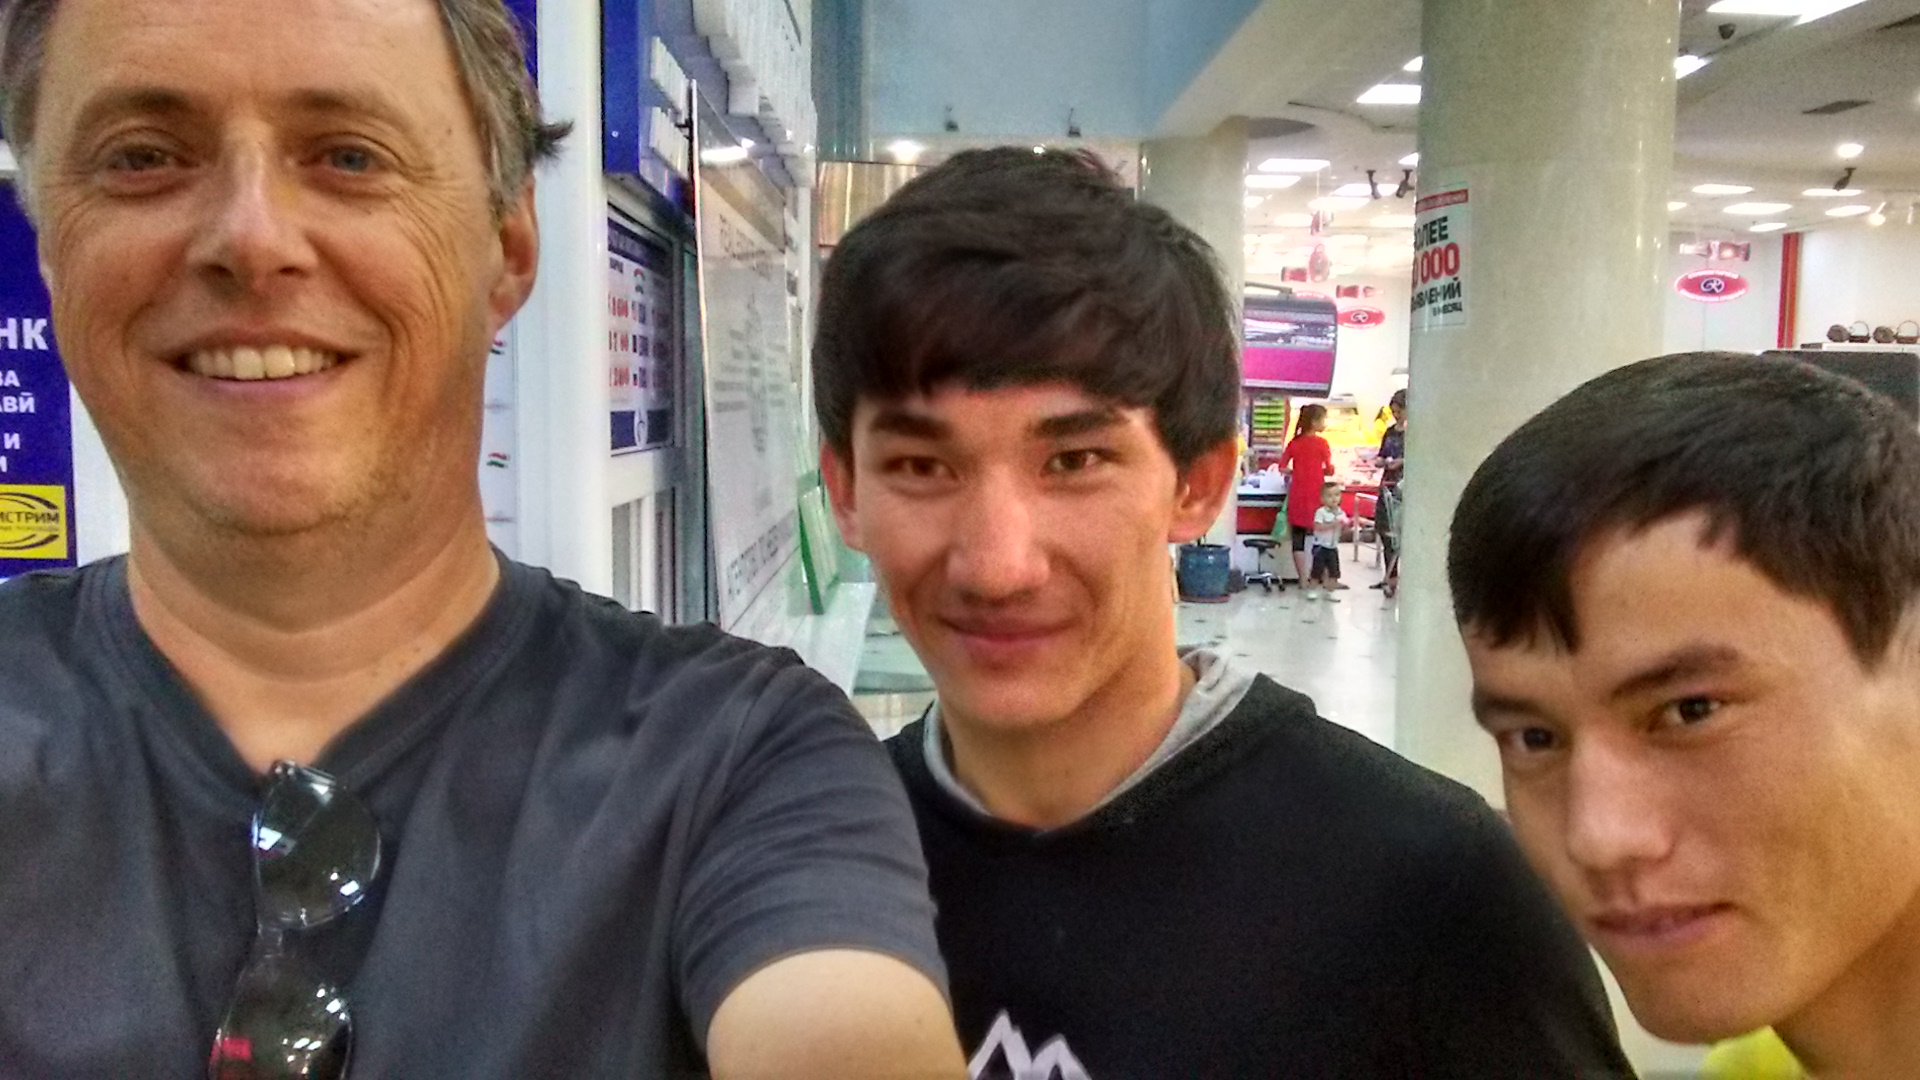 Me with an Uzbek and a Turkmen. We bumped into each other in a supermarket.